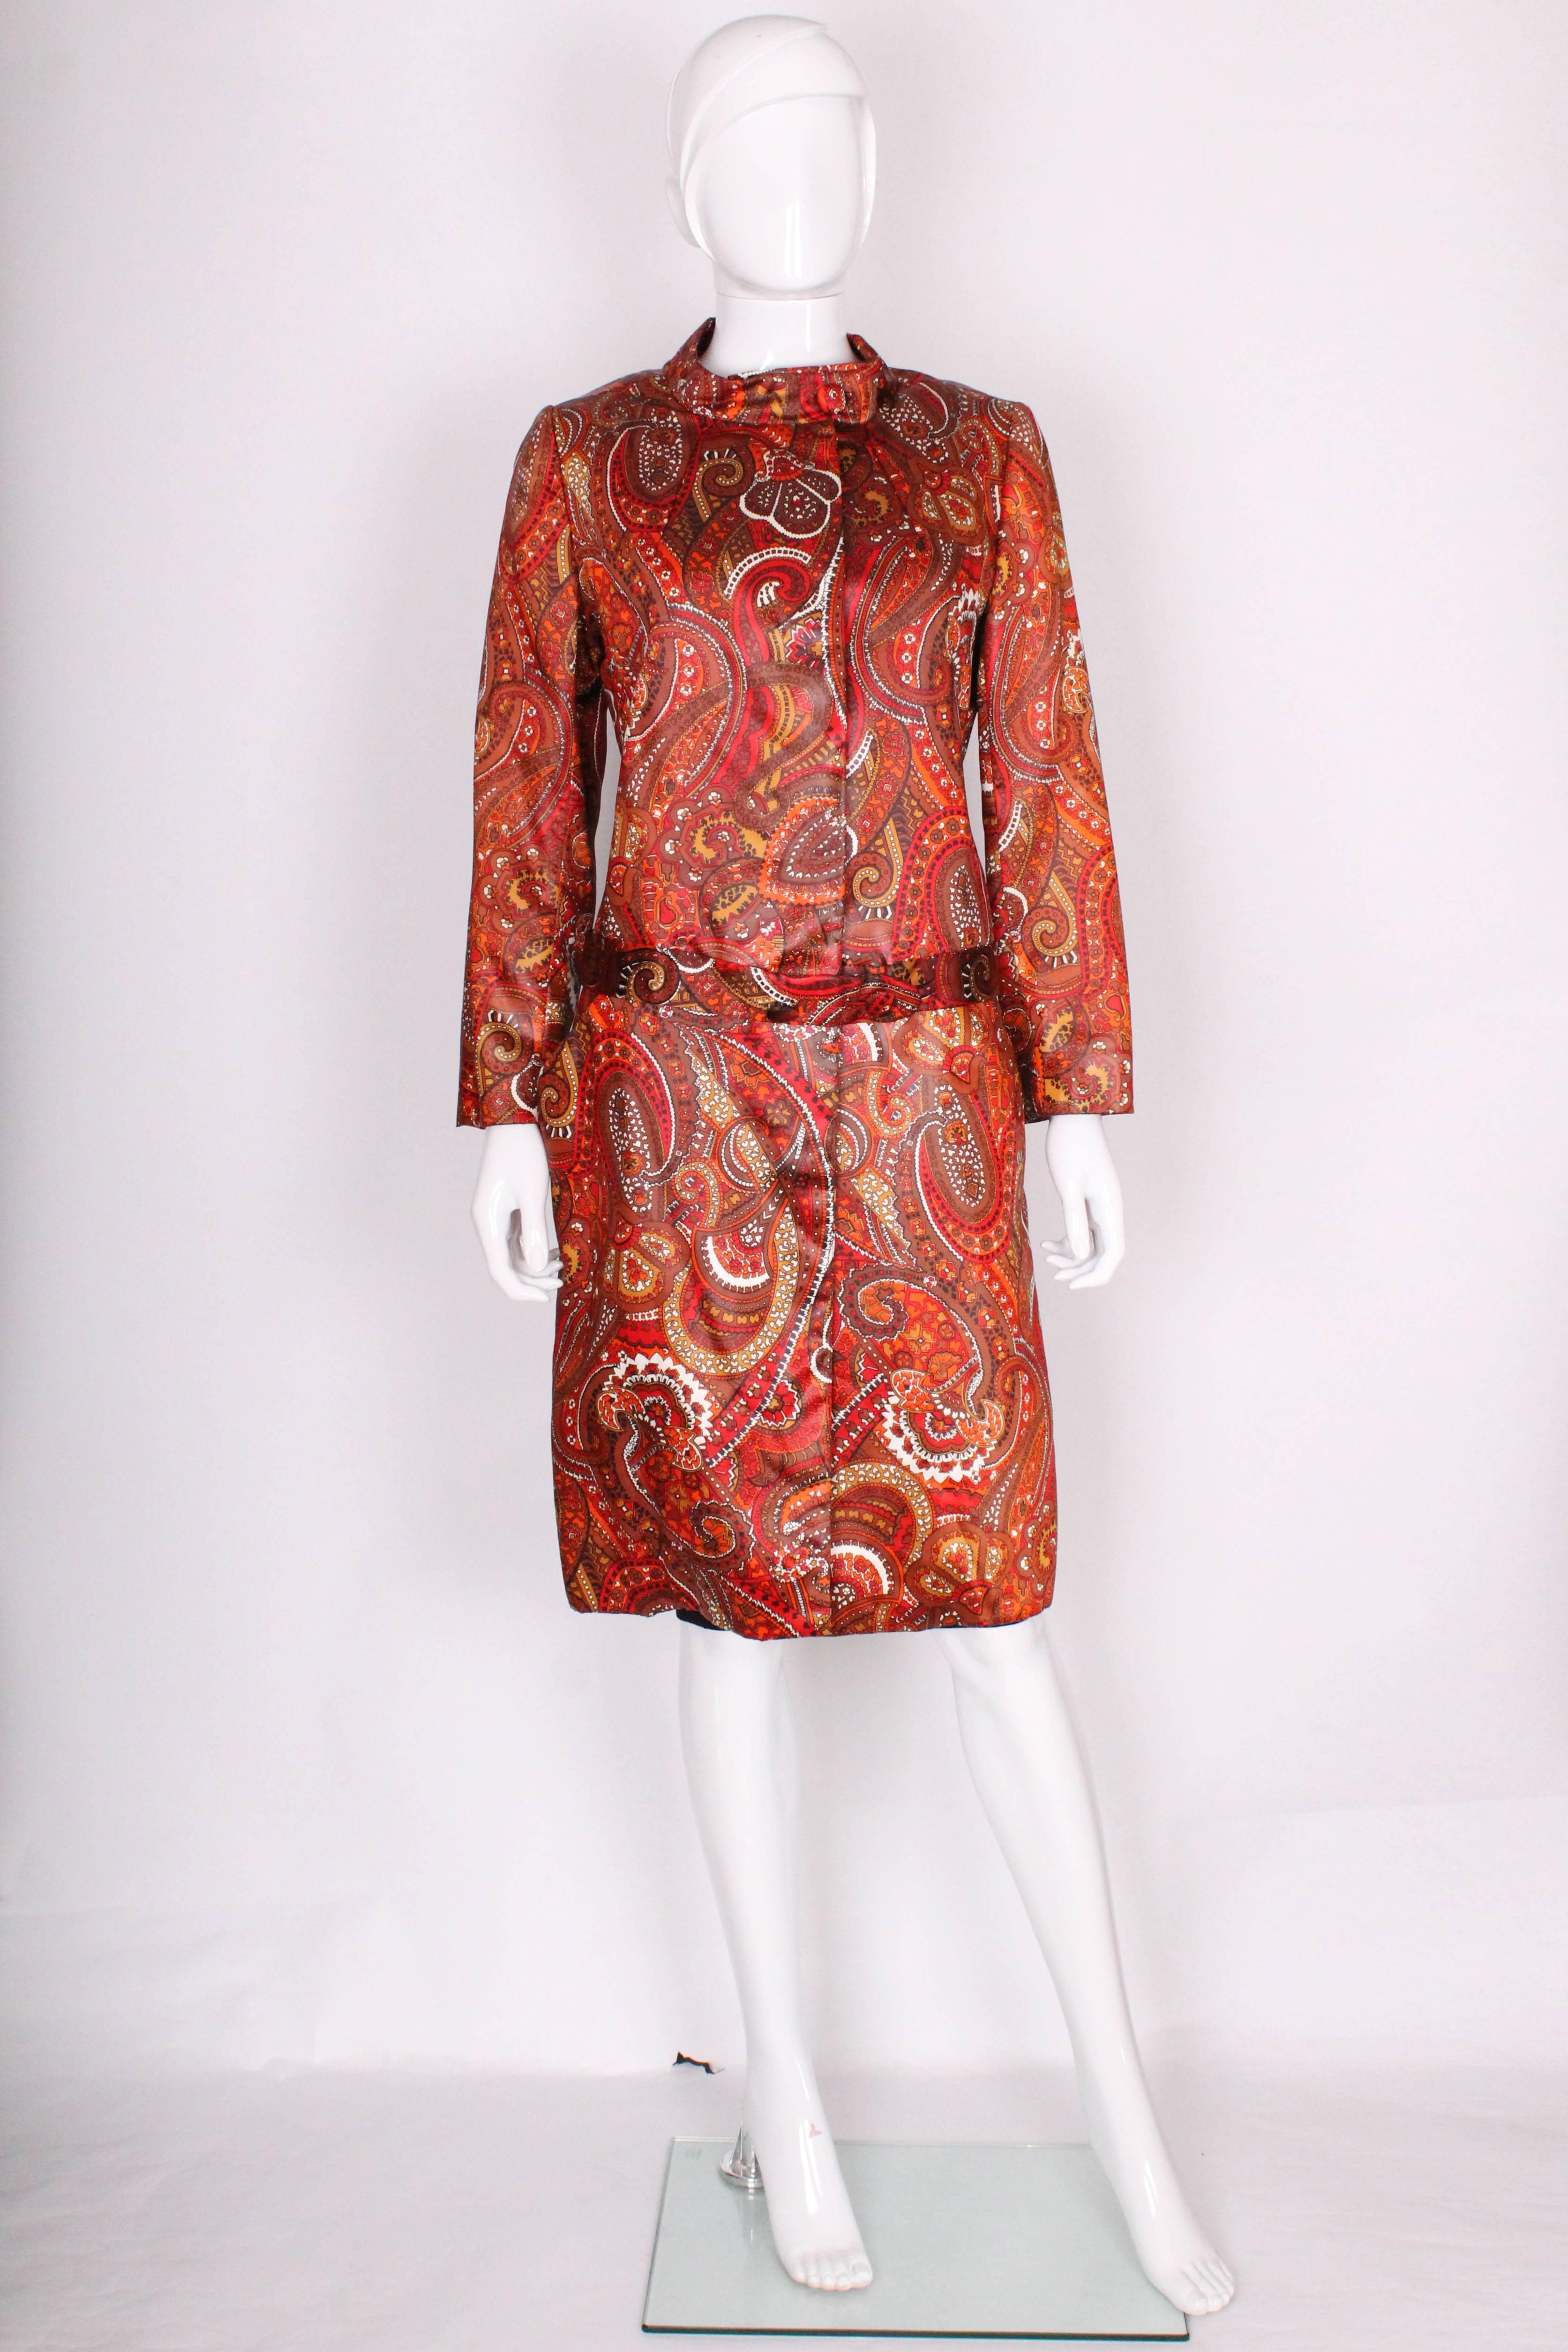 A great coat for fall from American designer Bill Blass.
In a wonderful paisley print ,and fall colours of red, orange, white, brown and bronze.This coat is loose fitting with a mandarin collar with buttons at the neck, a 4 button fastening, two